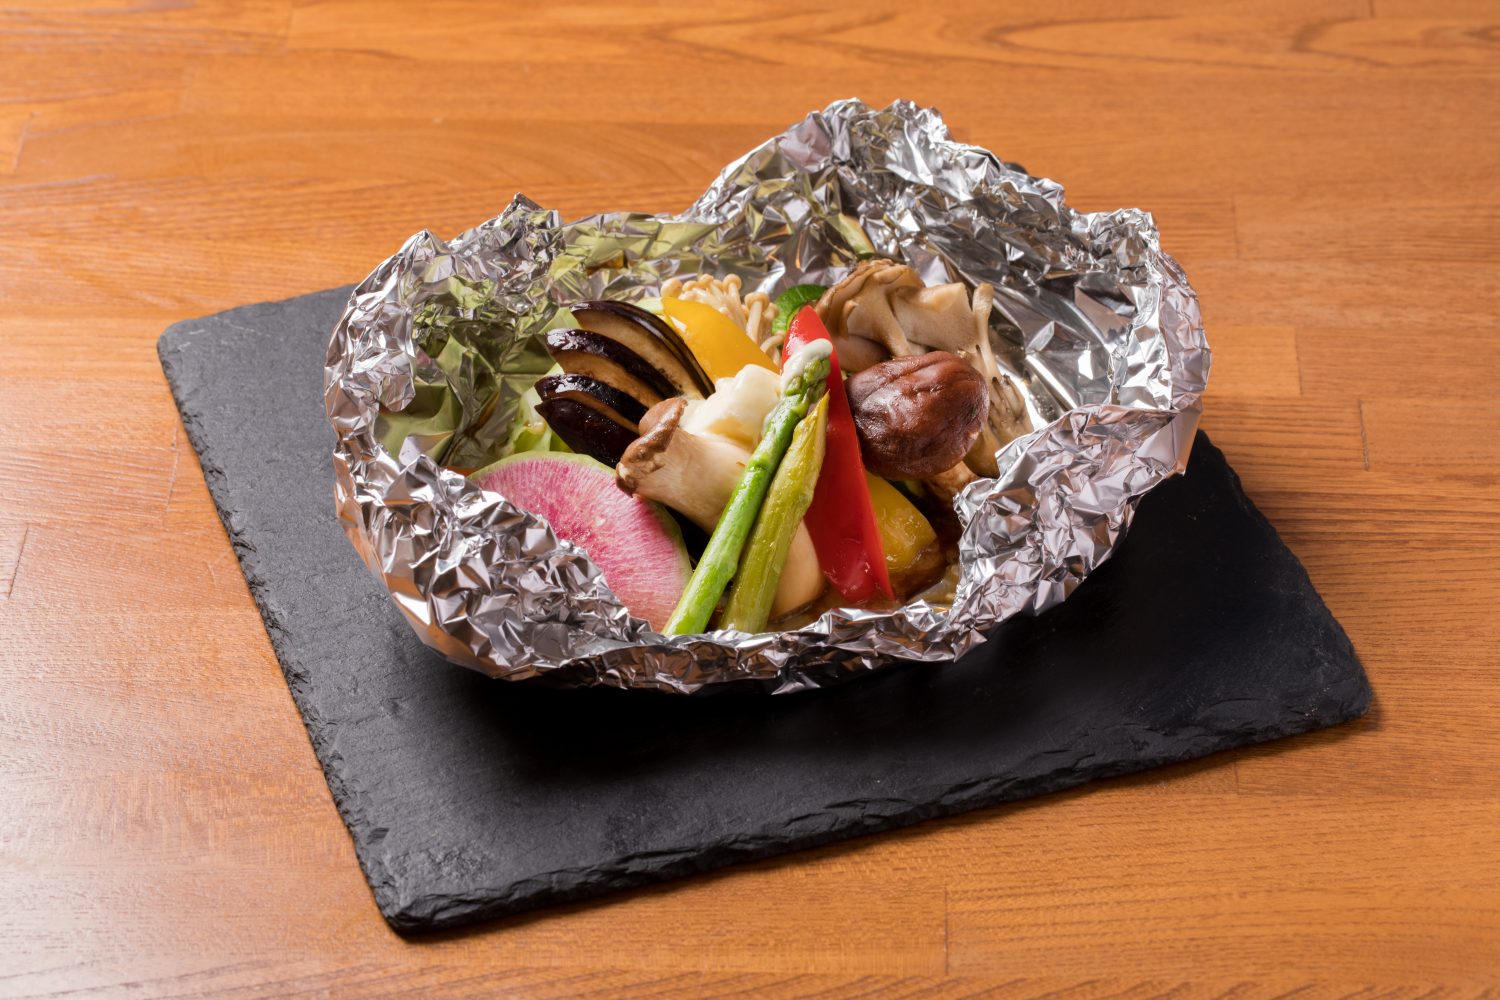 Vegetables baked in foil with butter and soy sauce